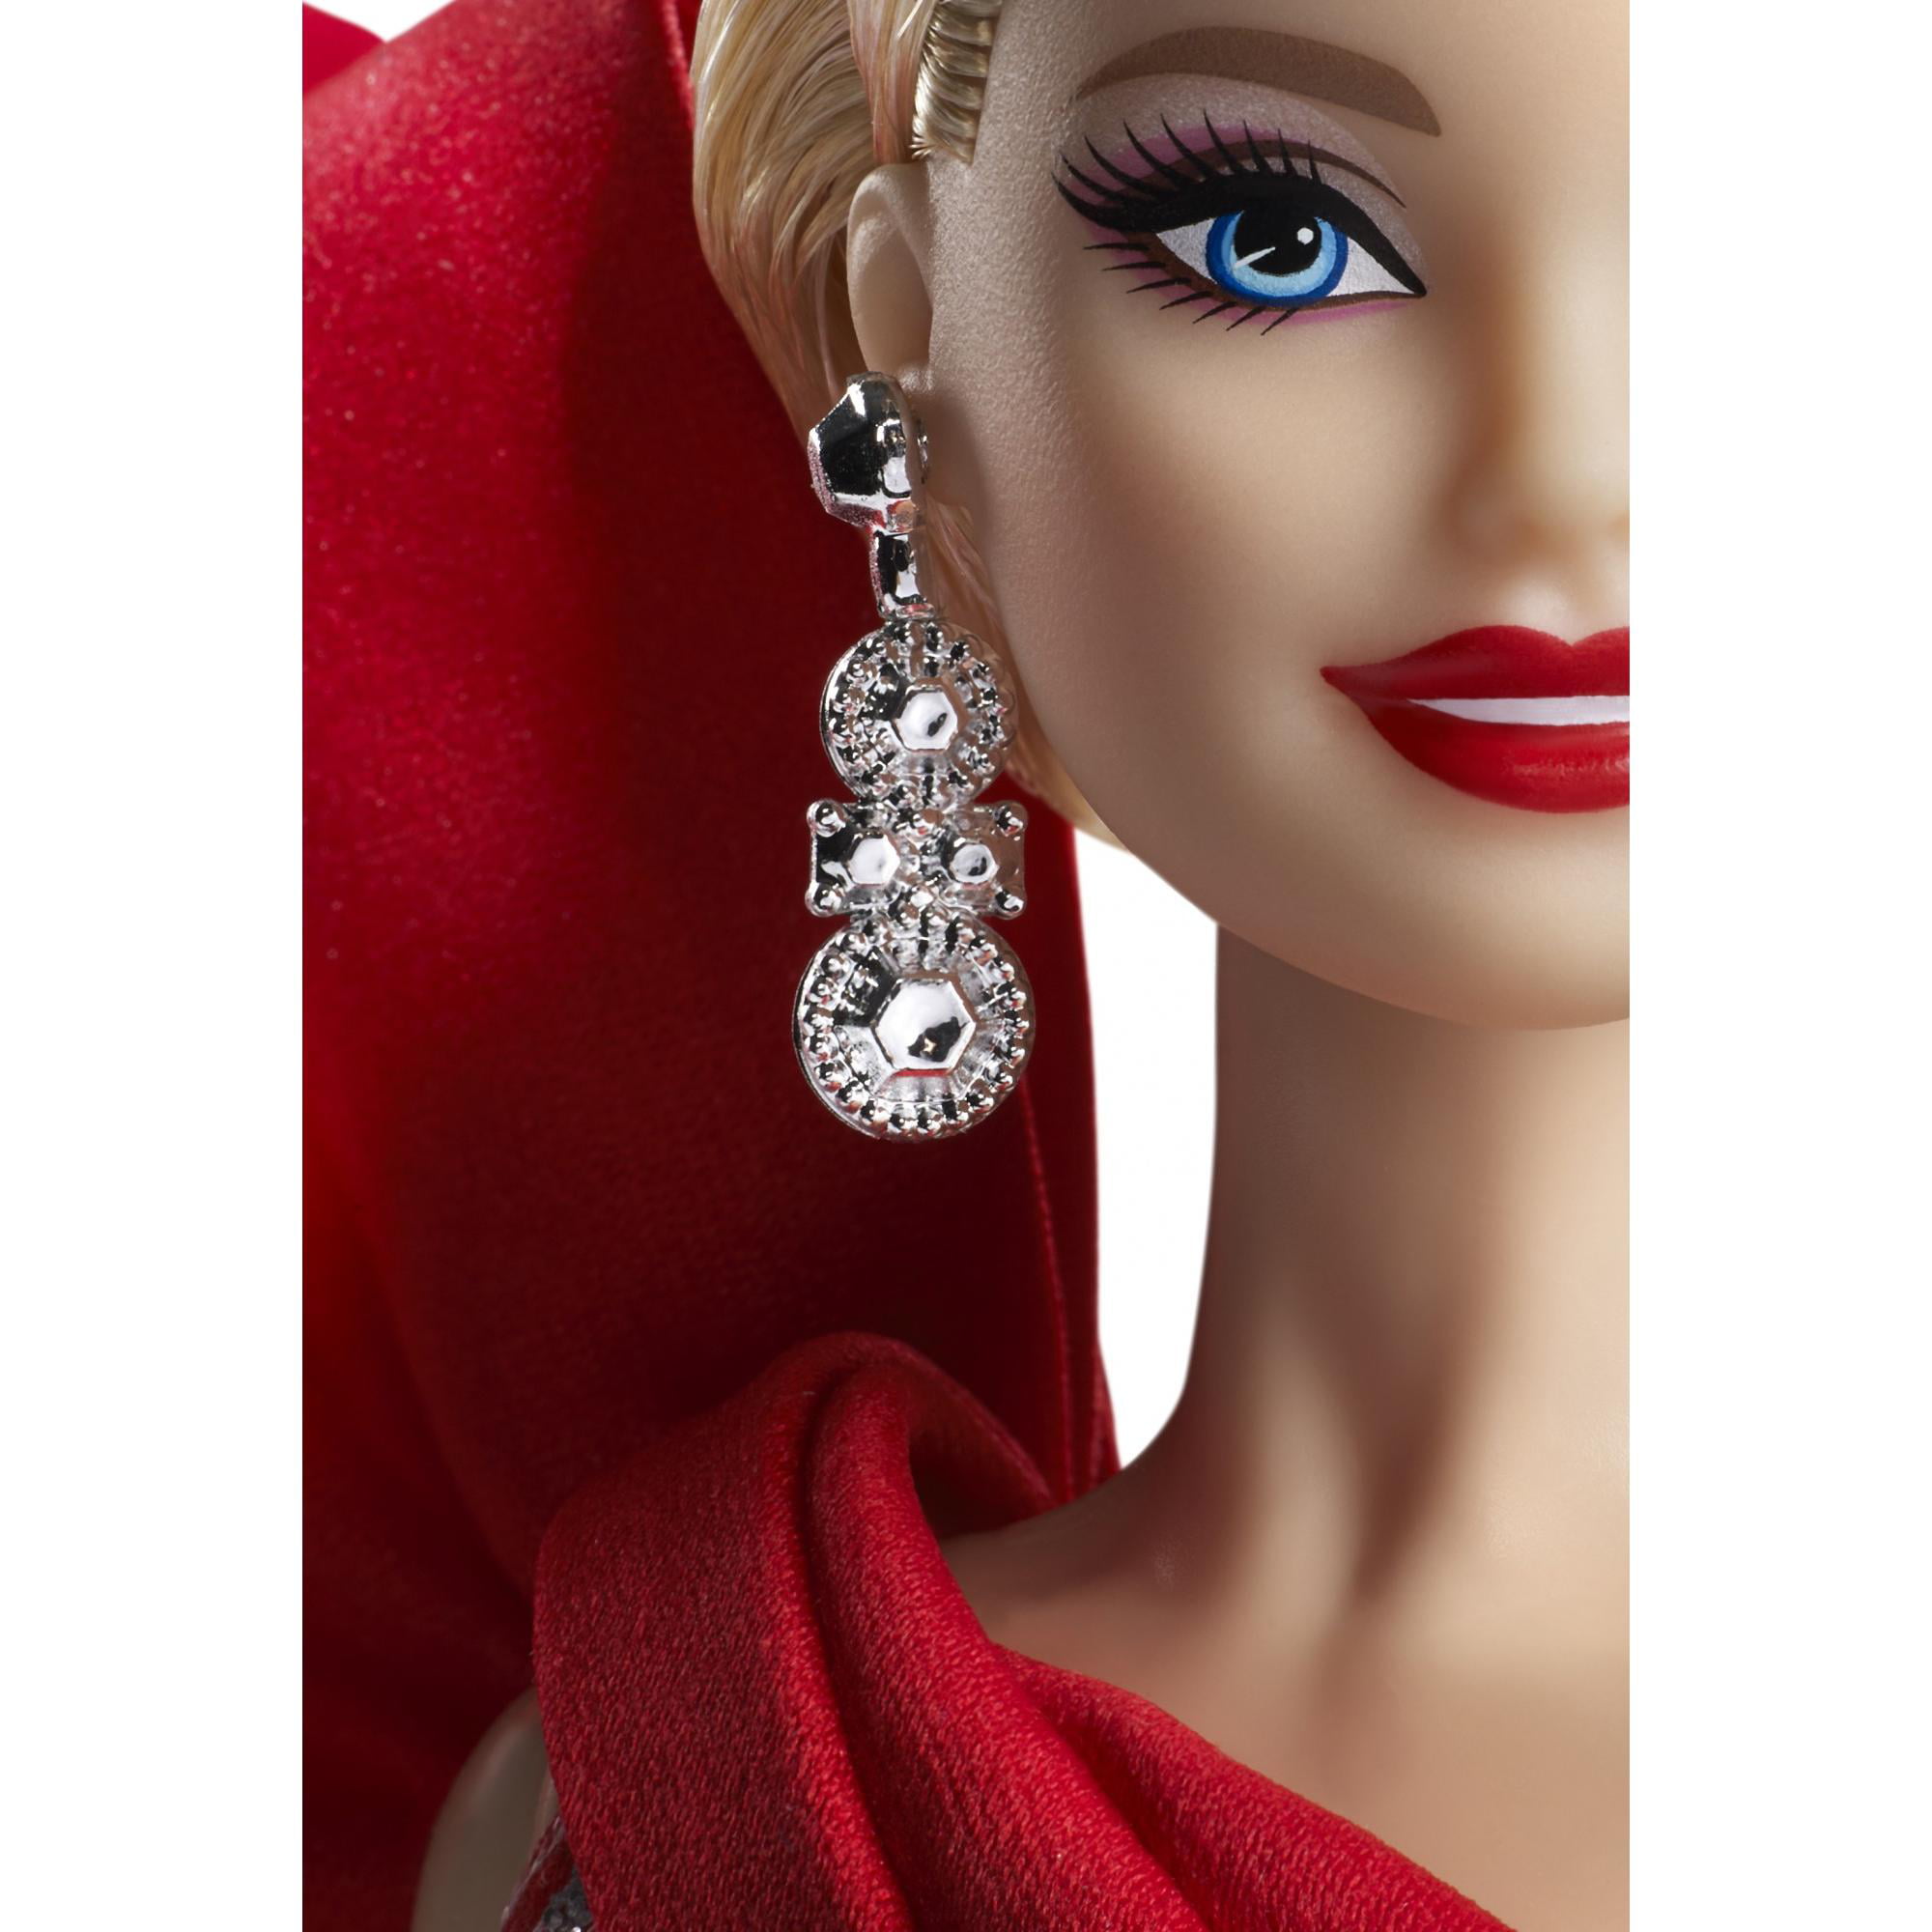 grens Puur Vreemdeling Barbie 2019 Holiday Doll, Blonde Curls with Red & White Gown - Walmart.com